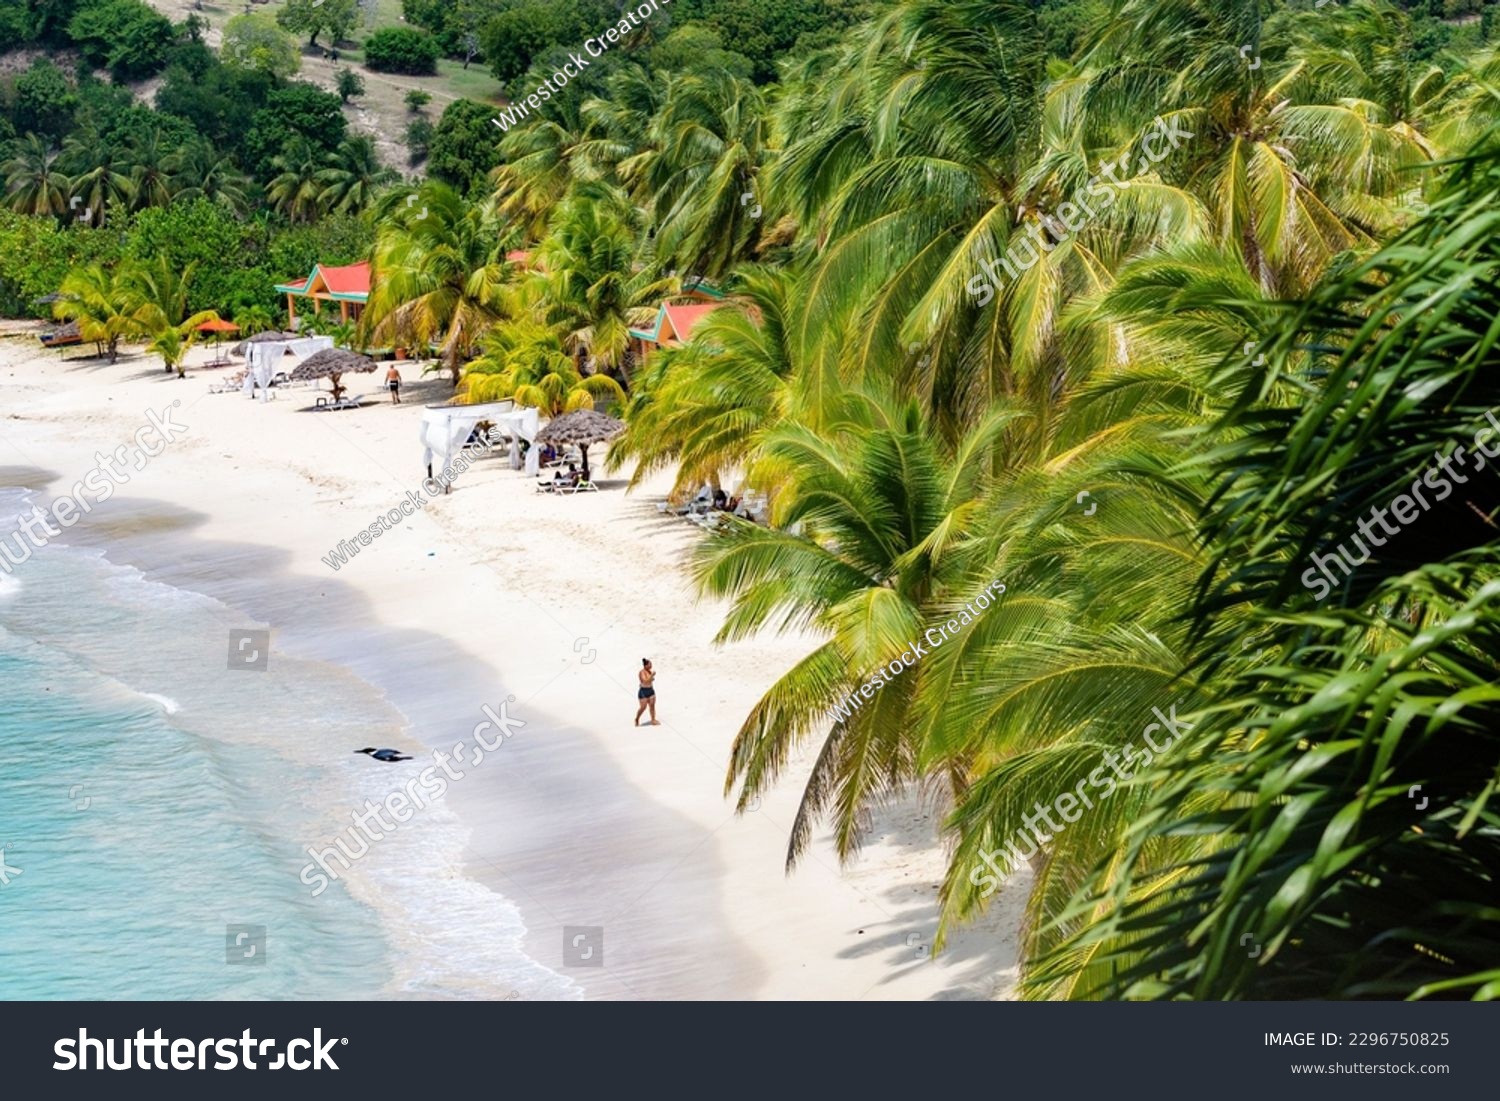 An aerial view of the shore of Ile a Vache in Haiti on a sunny day #2296750825